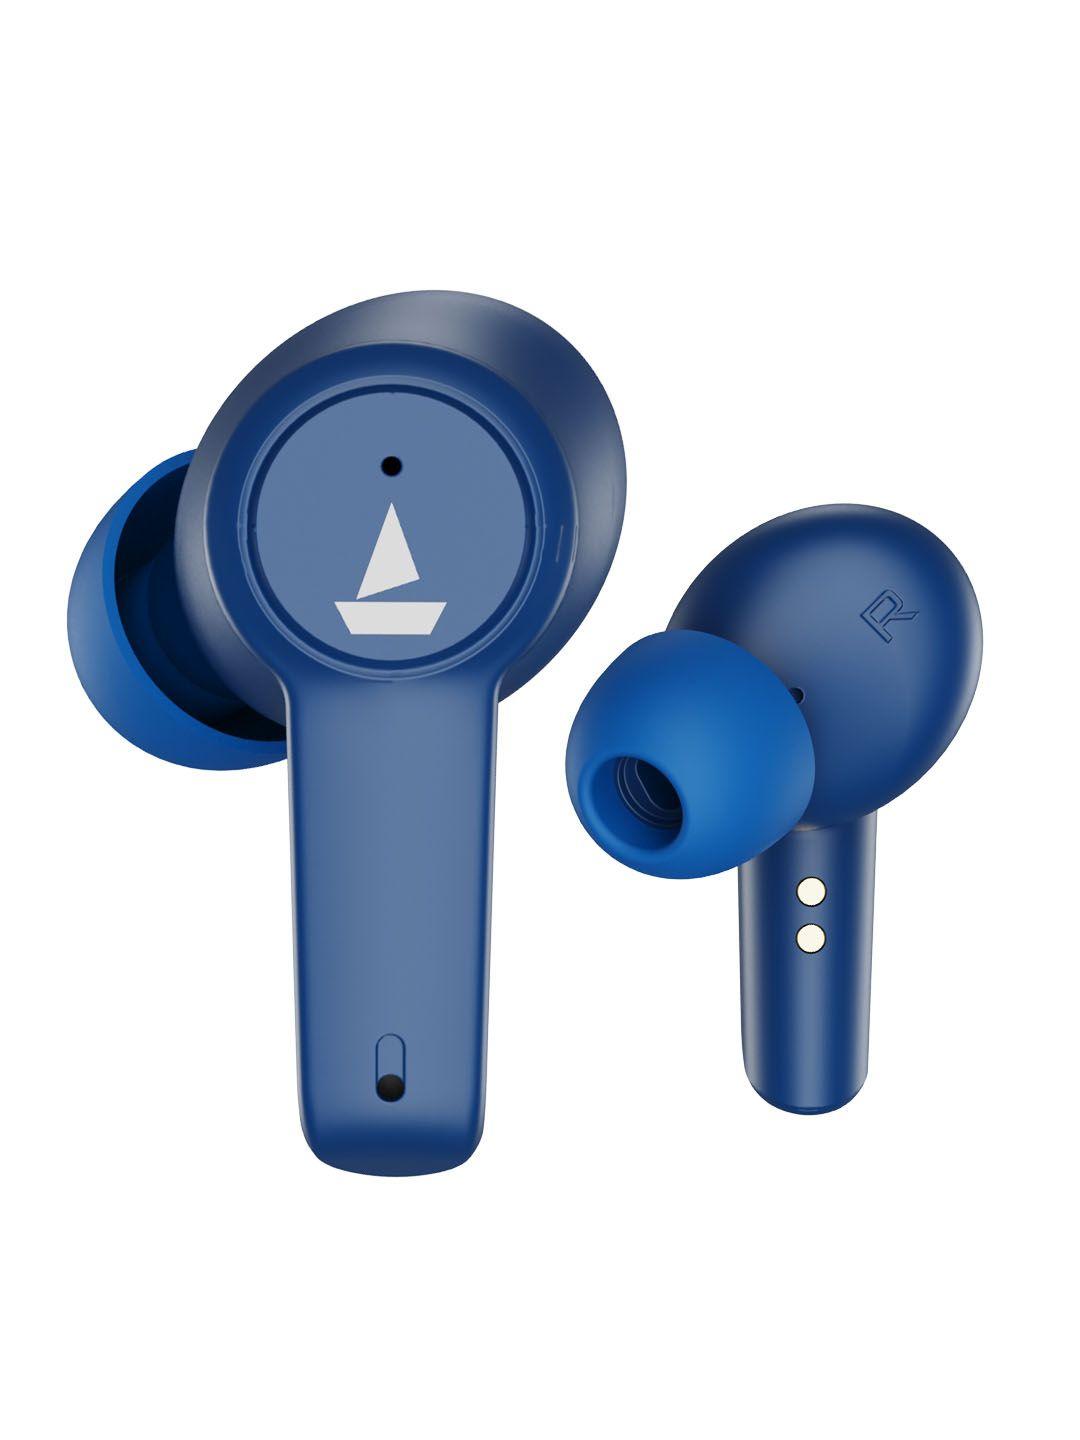 boat airdopes 411 anc m tws earbuds with upto 17.5hrs playback - blue